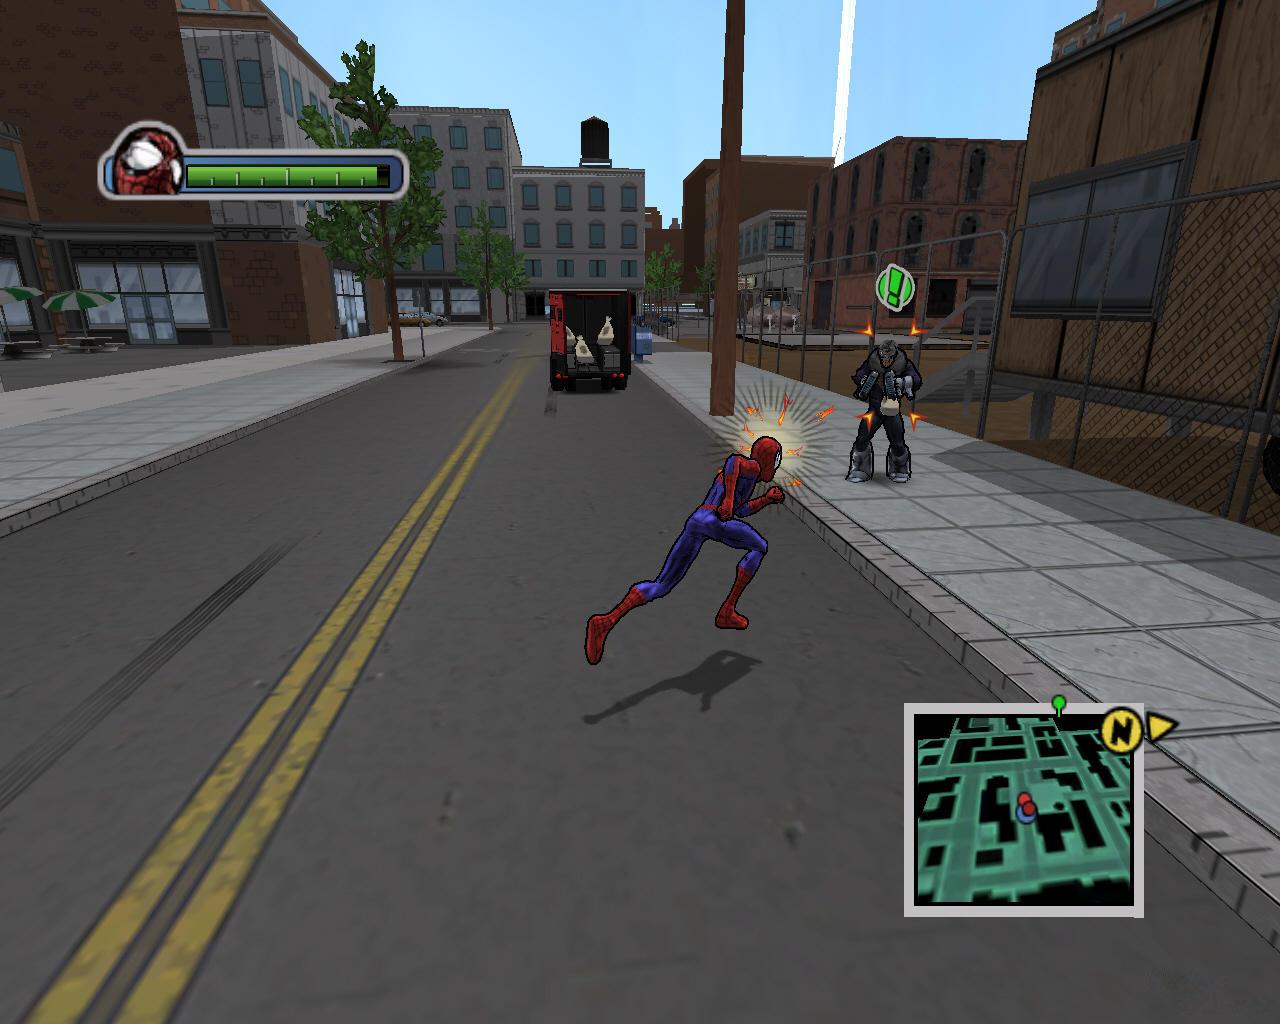 Spider-Man download the last version for windows